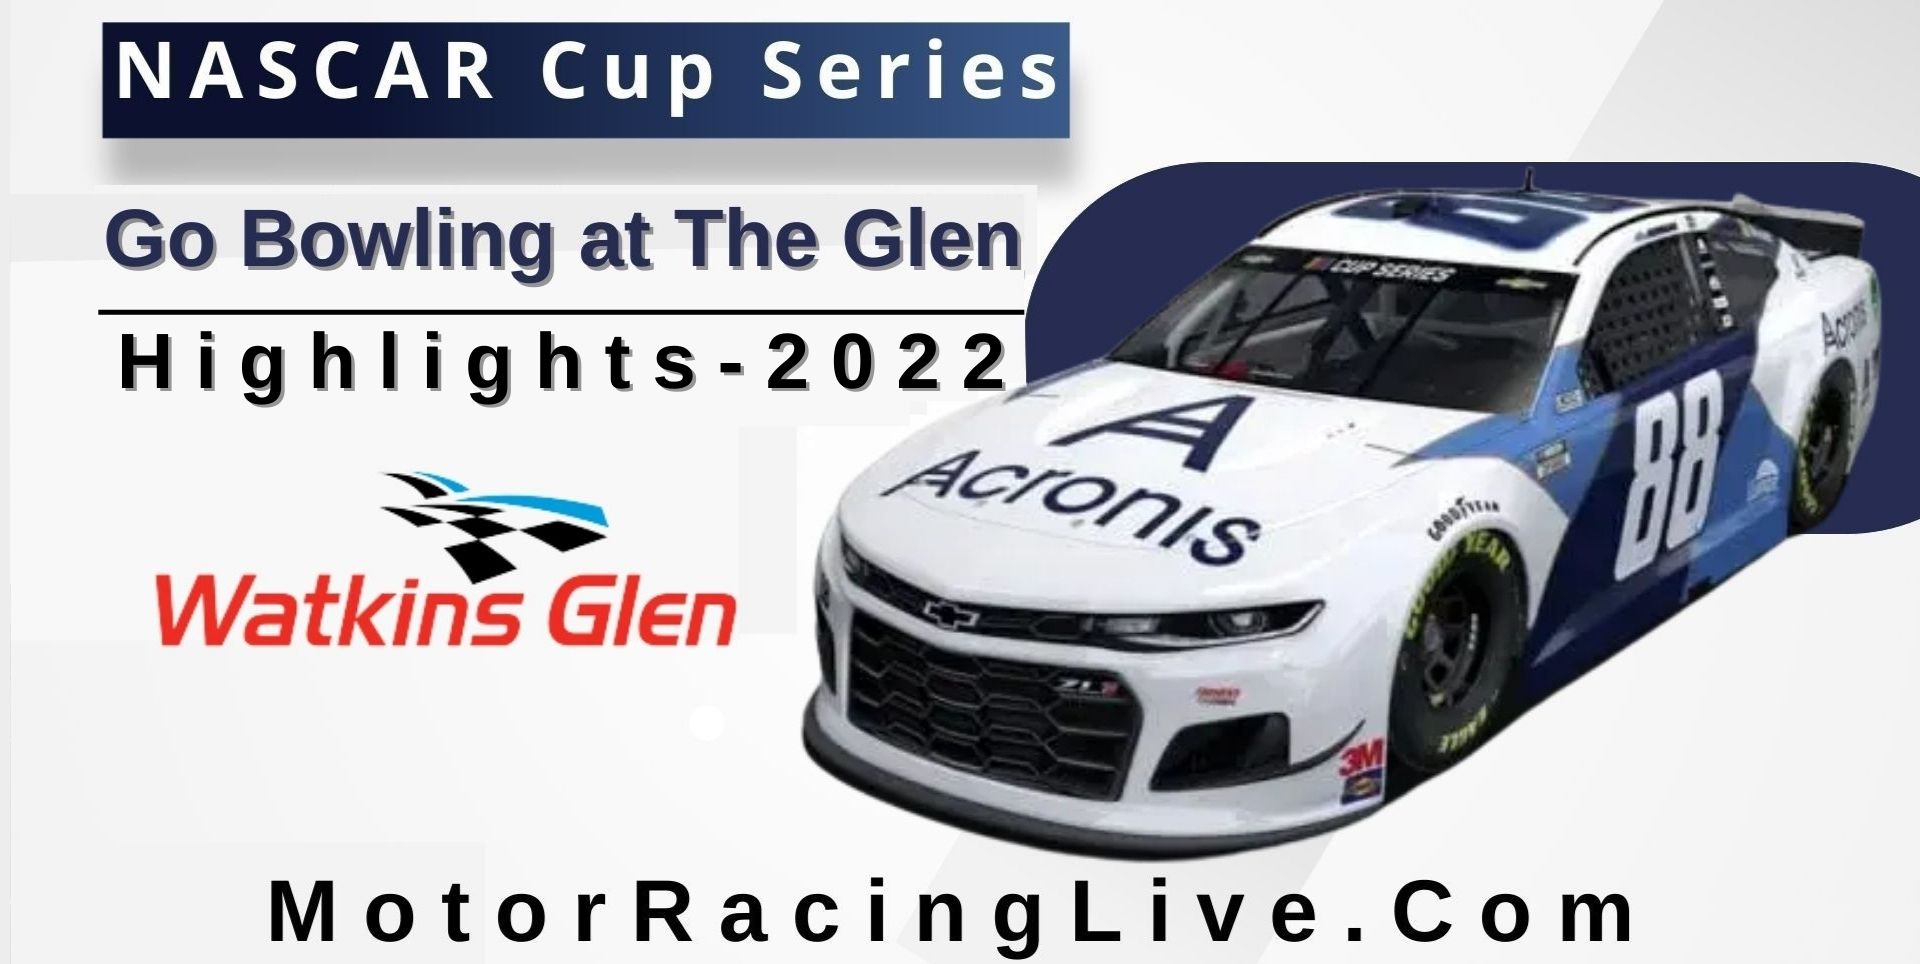 Go Bowling At The Glen Highlights 2022 NASCAR Cup